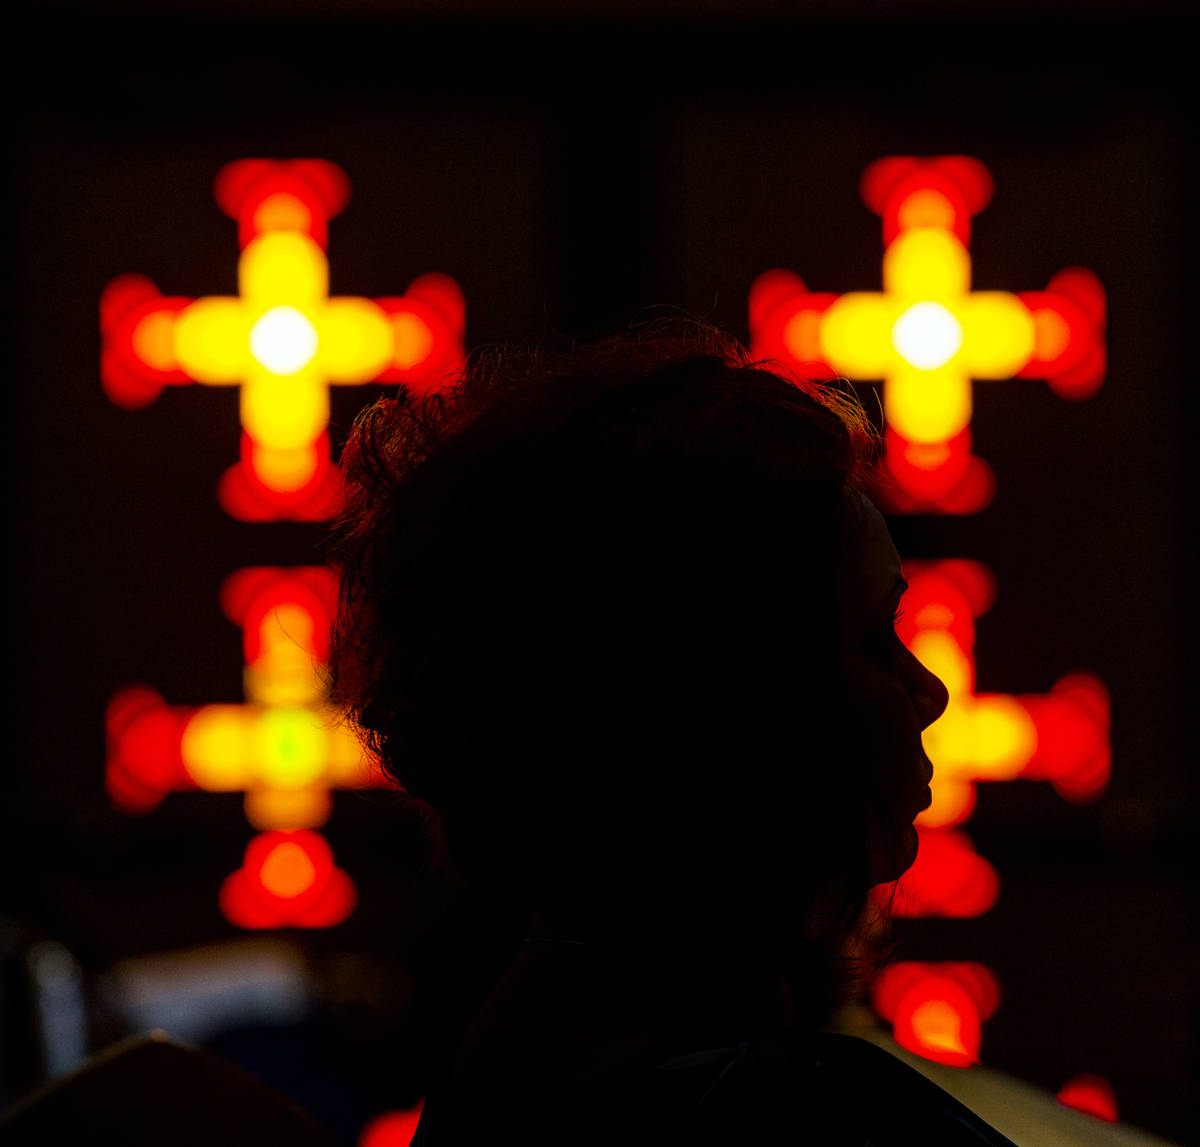 A parishioner prays during Sunday Mass at St. Anne's Catholic Church where they were asked to u ...